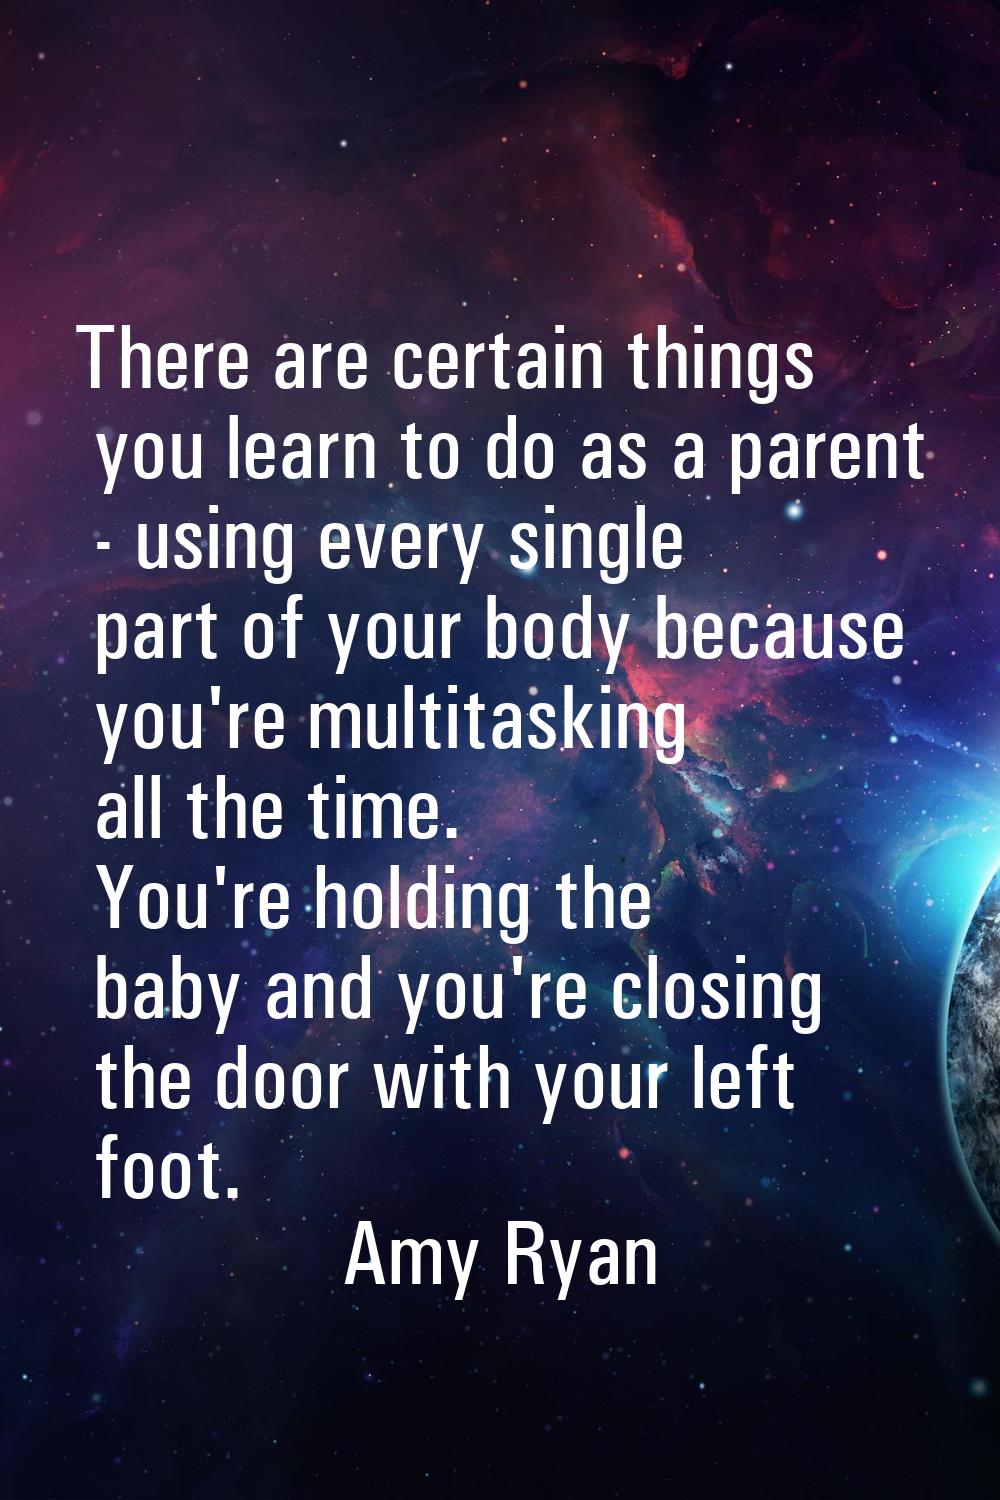 There are certain things you learn to do as a parent - using every single part of your body because